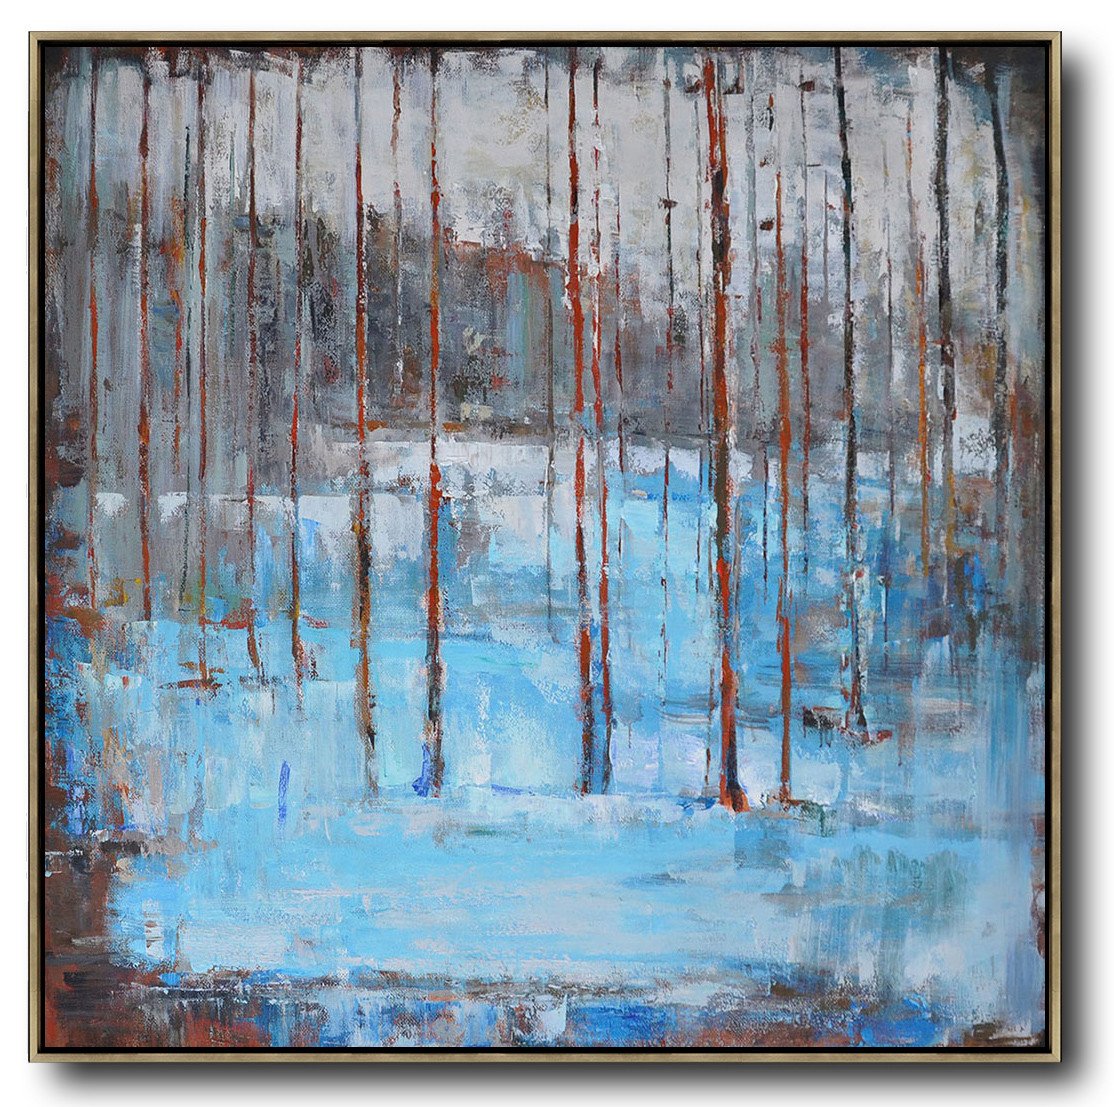 Hand-painted oversized Abstract Landscape Oil Painting by Jackson art for sale online